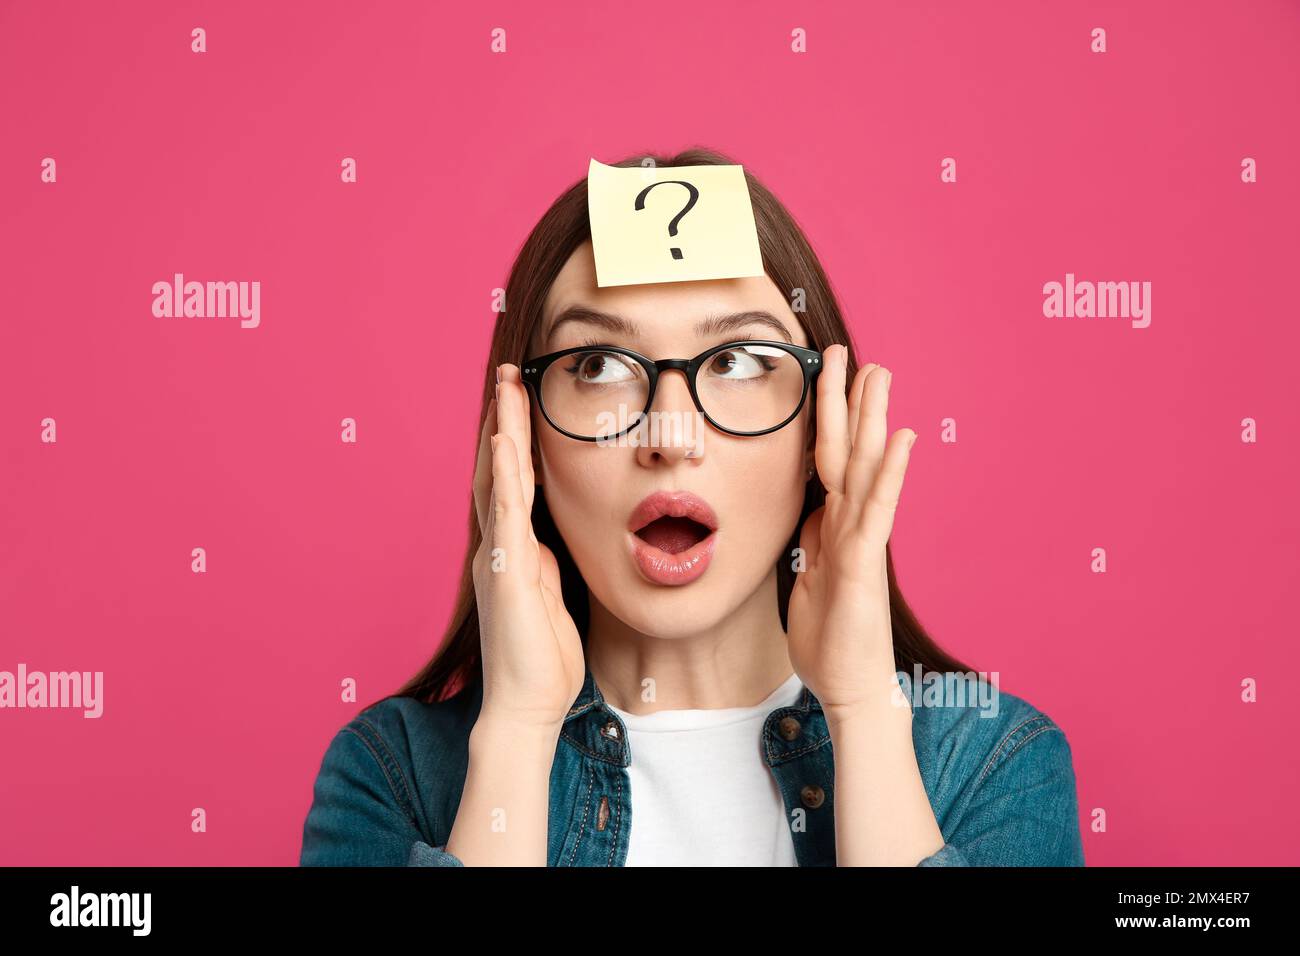 Emotional woman with question mark sticker on forehead against pink background Stock Photo